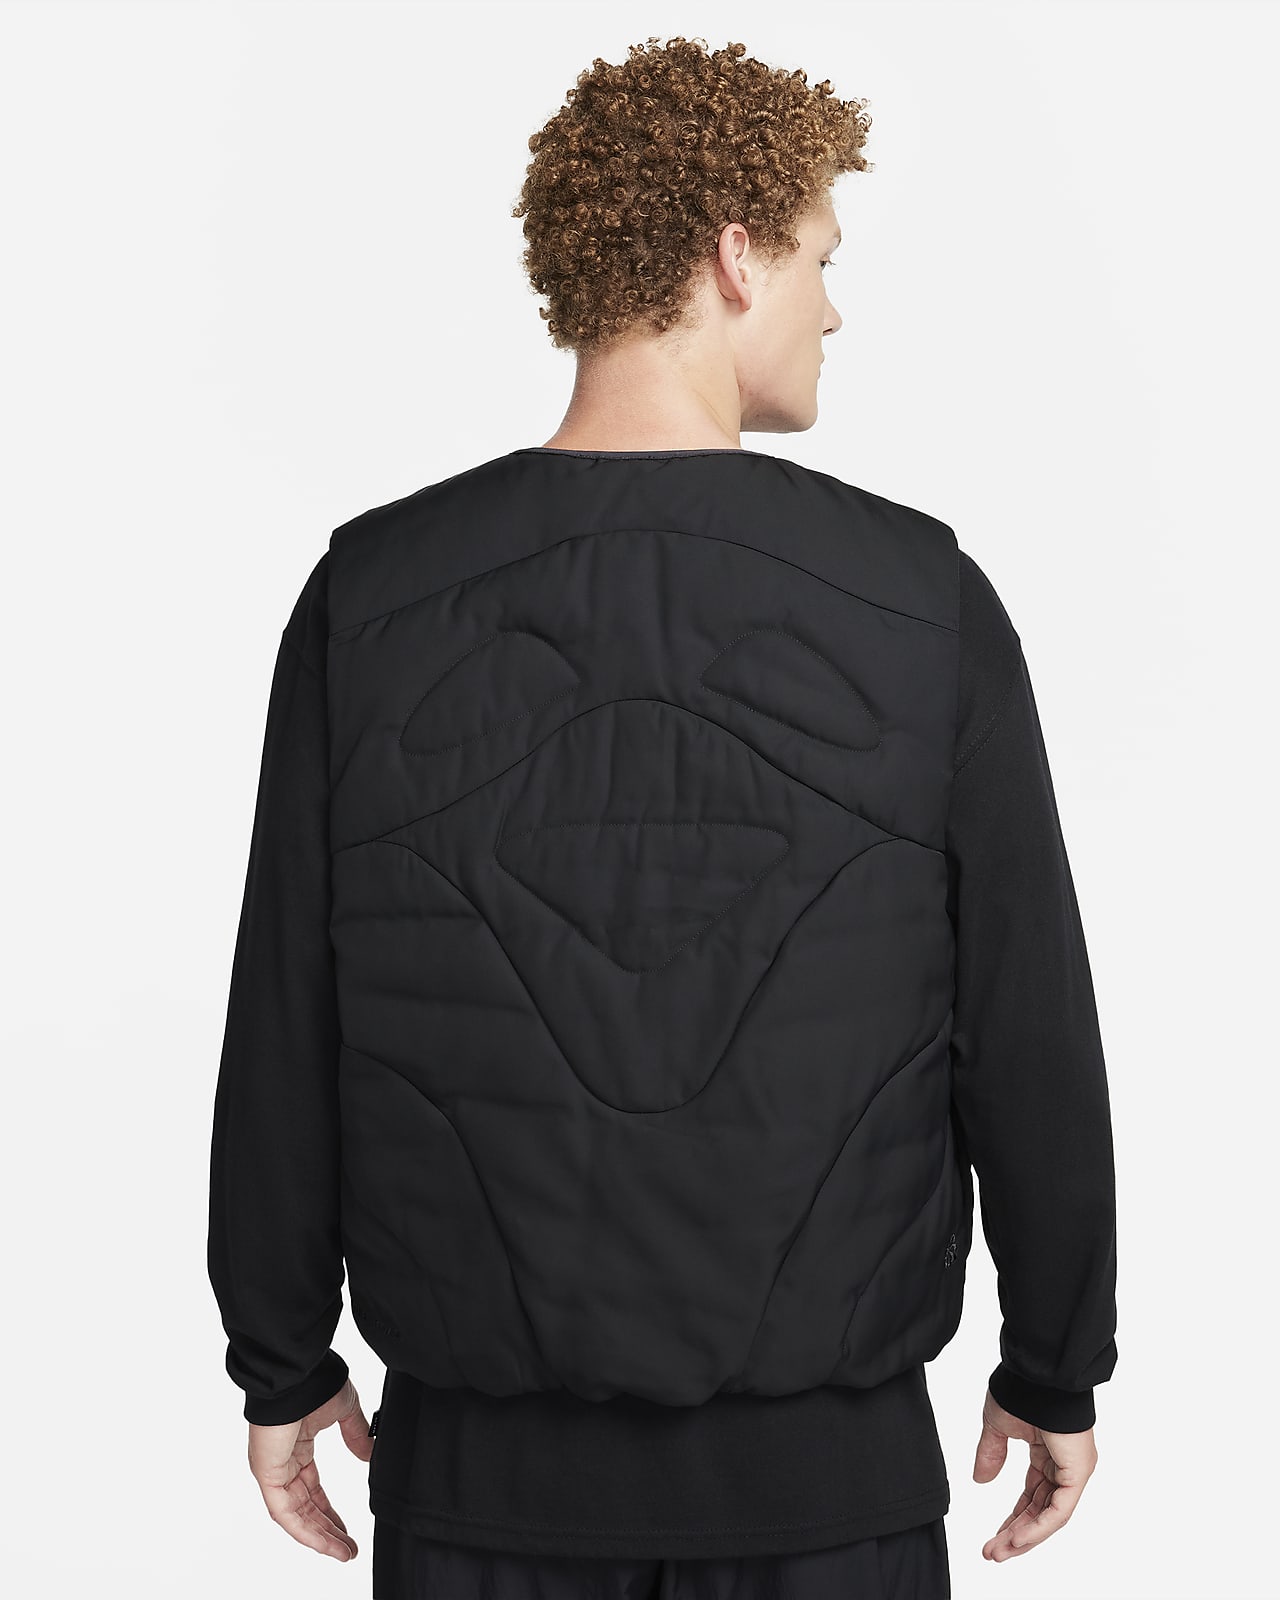 https://static.nike.com/a/images/t_PDP_1280_v1/f_auto,q_auto:eco/37124f06-f826-4d17-b8cb-776900108525/sportswear-tech-pack-adv-insulated-gilet-1BZwQl.png